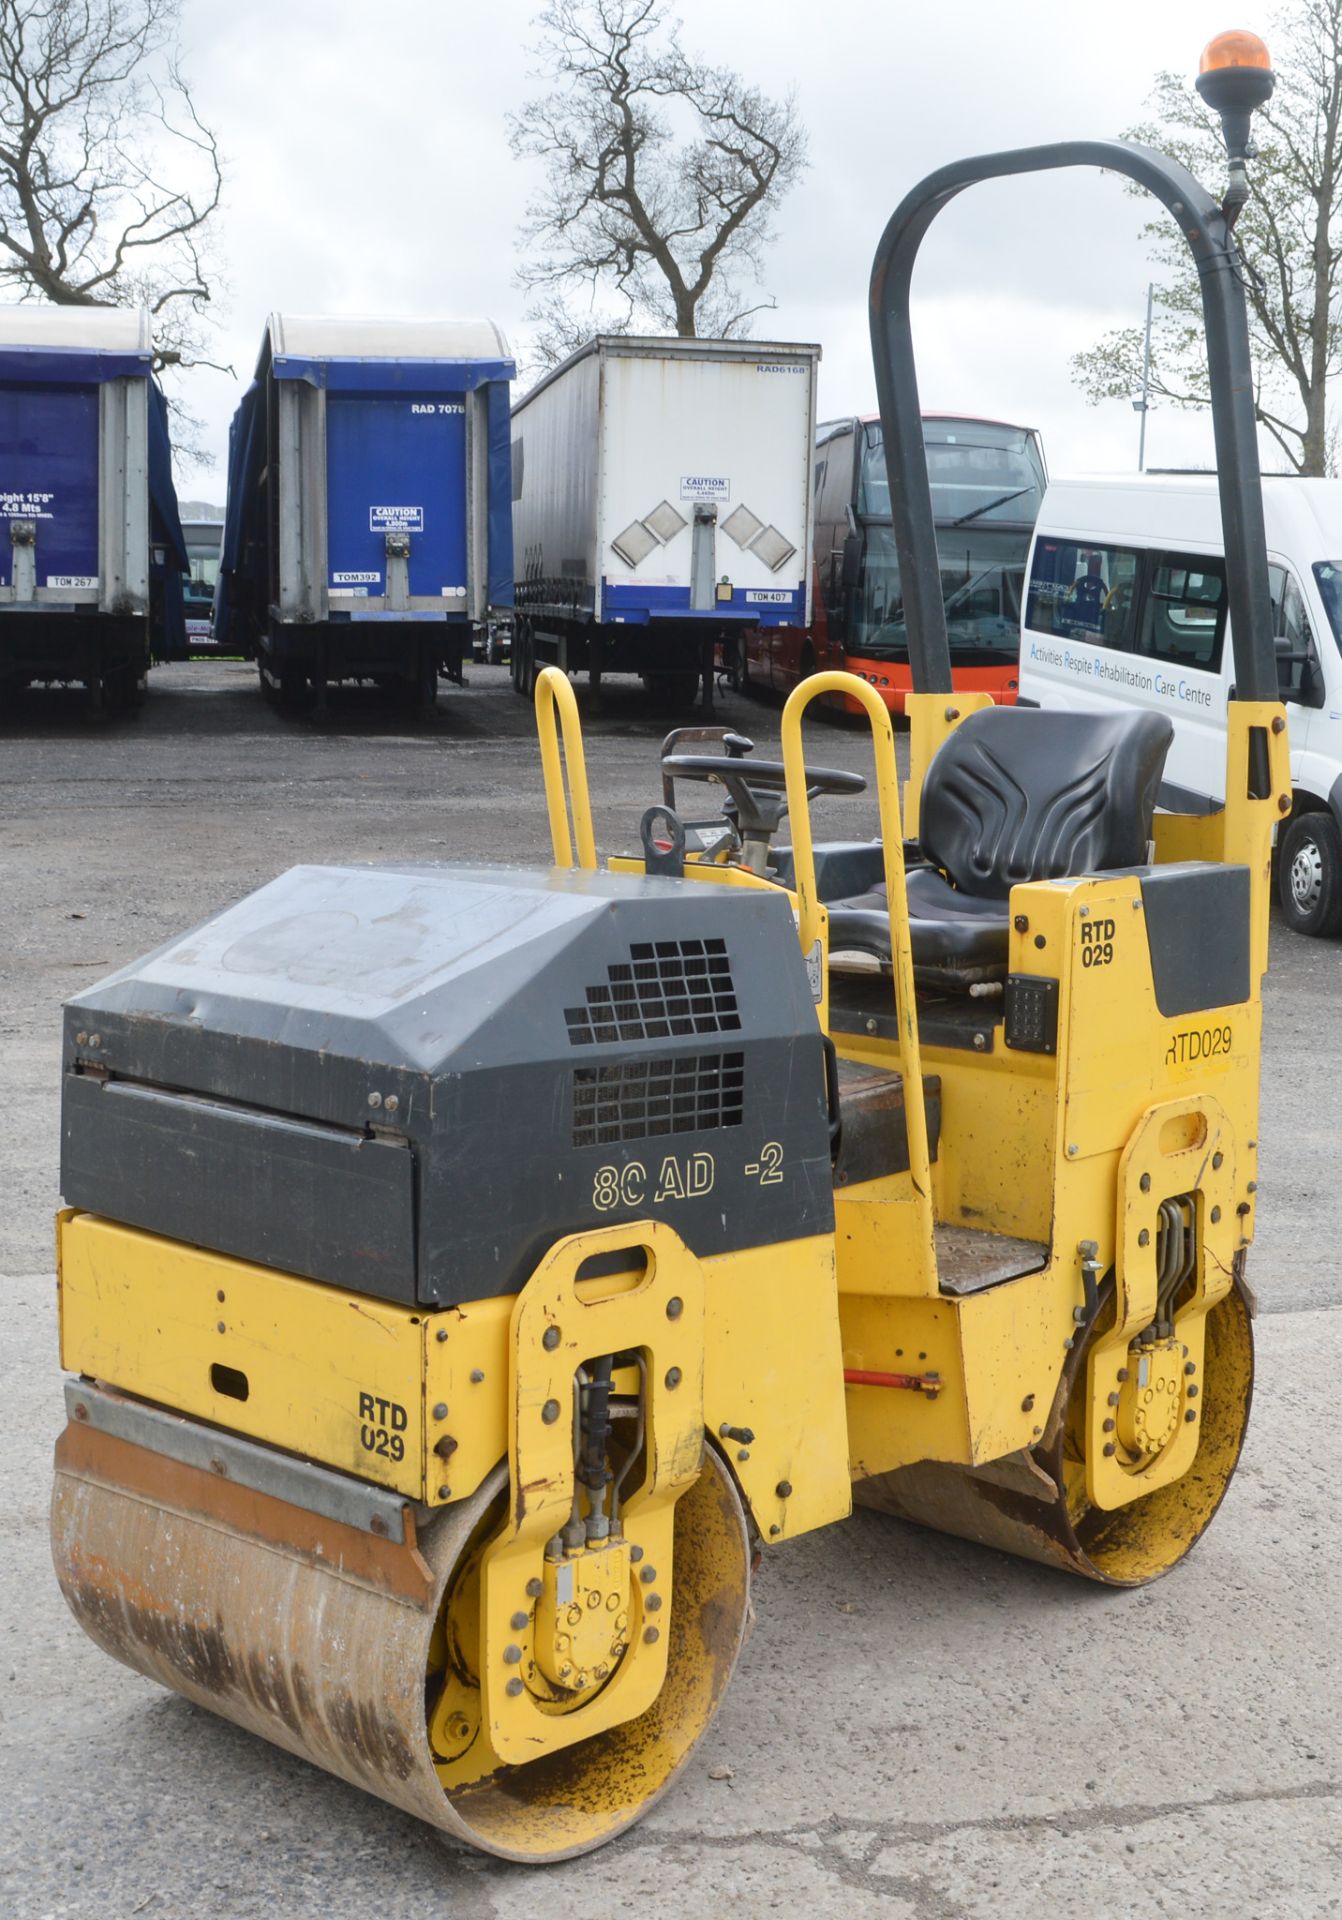 Bomag BW80AD-2 double drum ride on roller  Year: 2006 S/N: 426052 Recorded hours: 869 RTD029